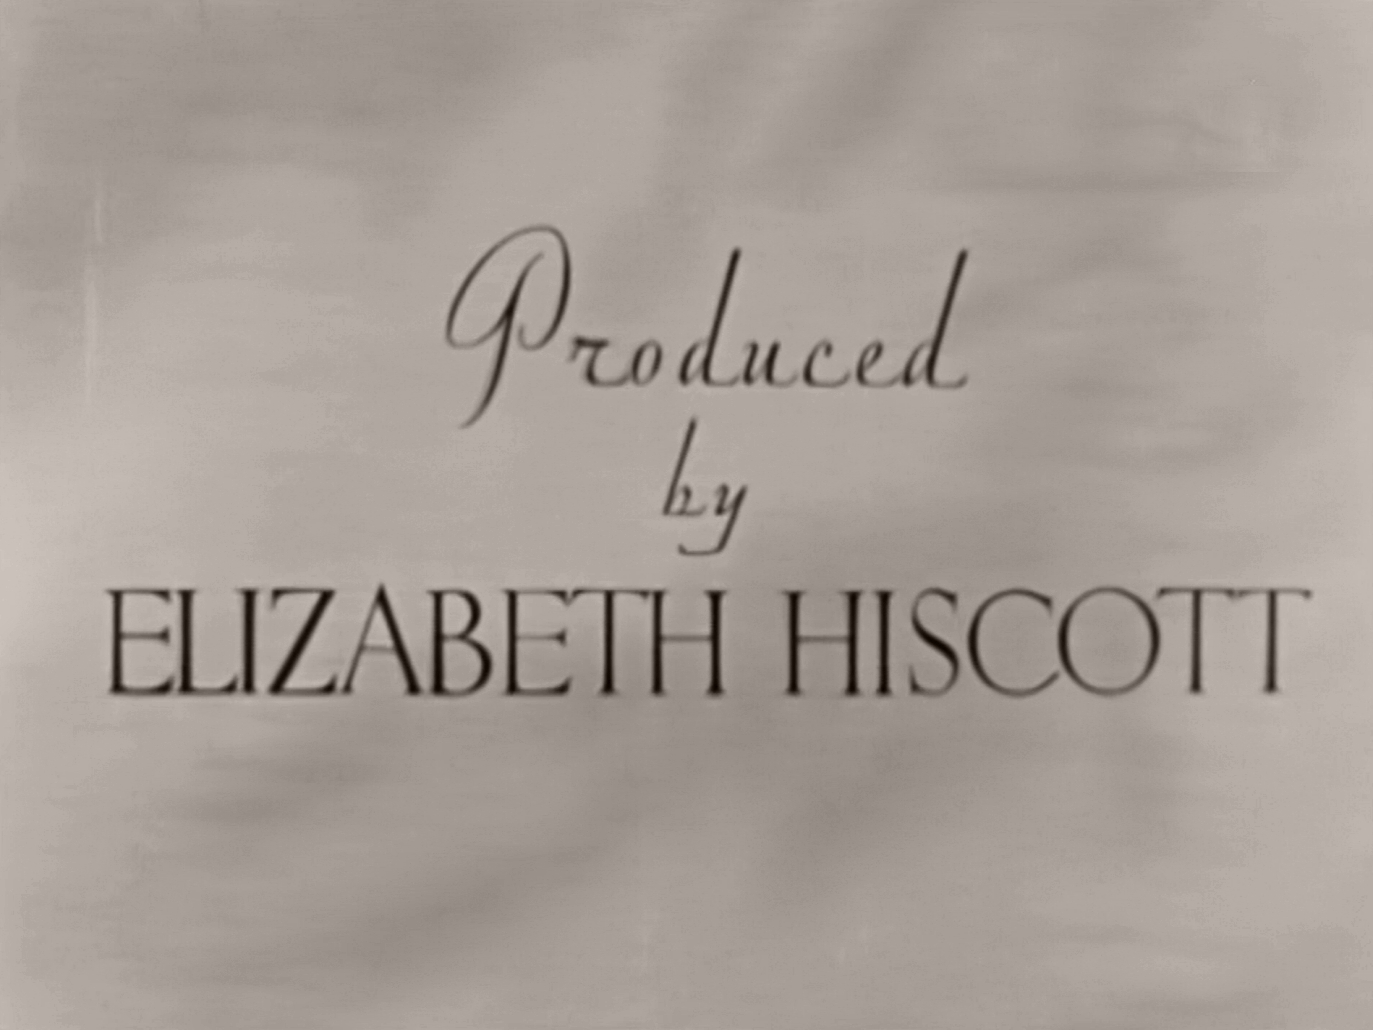 Main title from Sabotage at Sea (1942) (5). Produced by Elizabeth Hiscott